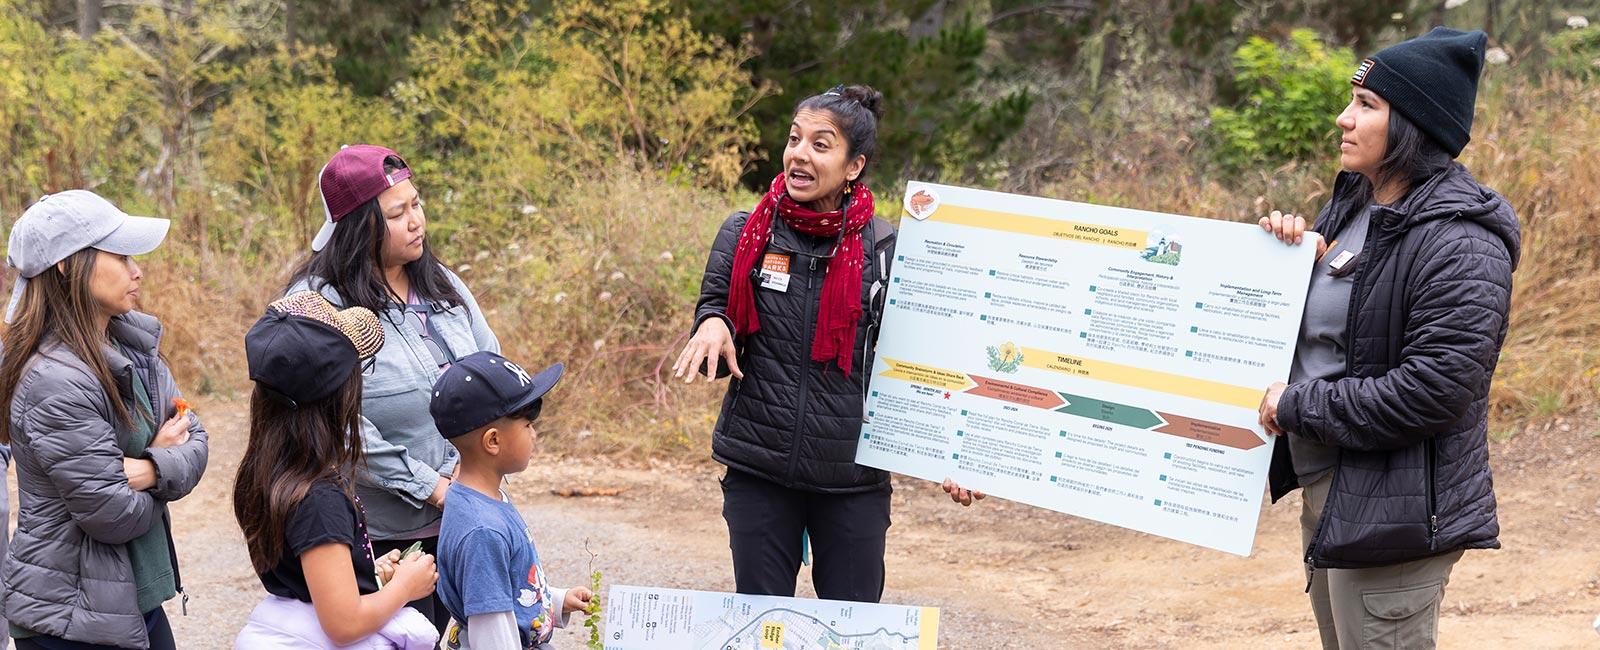 Golden Gate National Parks Conservancy staff hold infographic signs engaging with community members in nature at Rancho Corral de Tierra